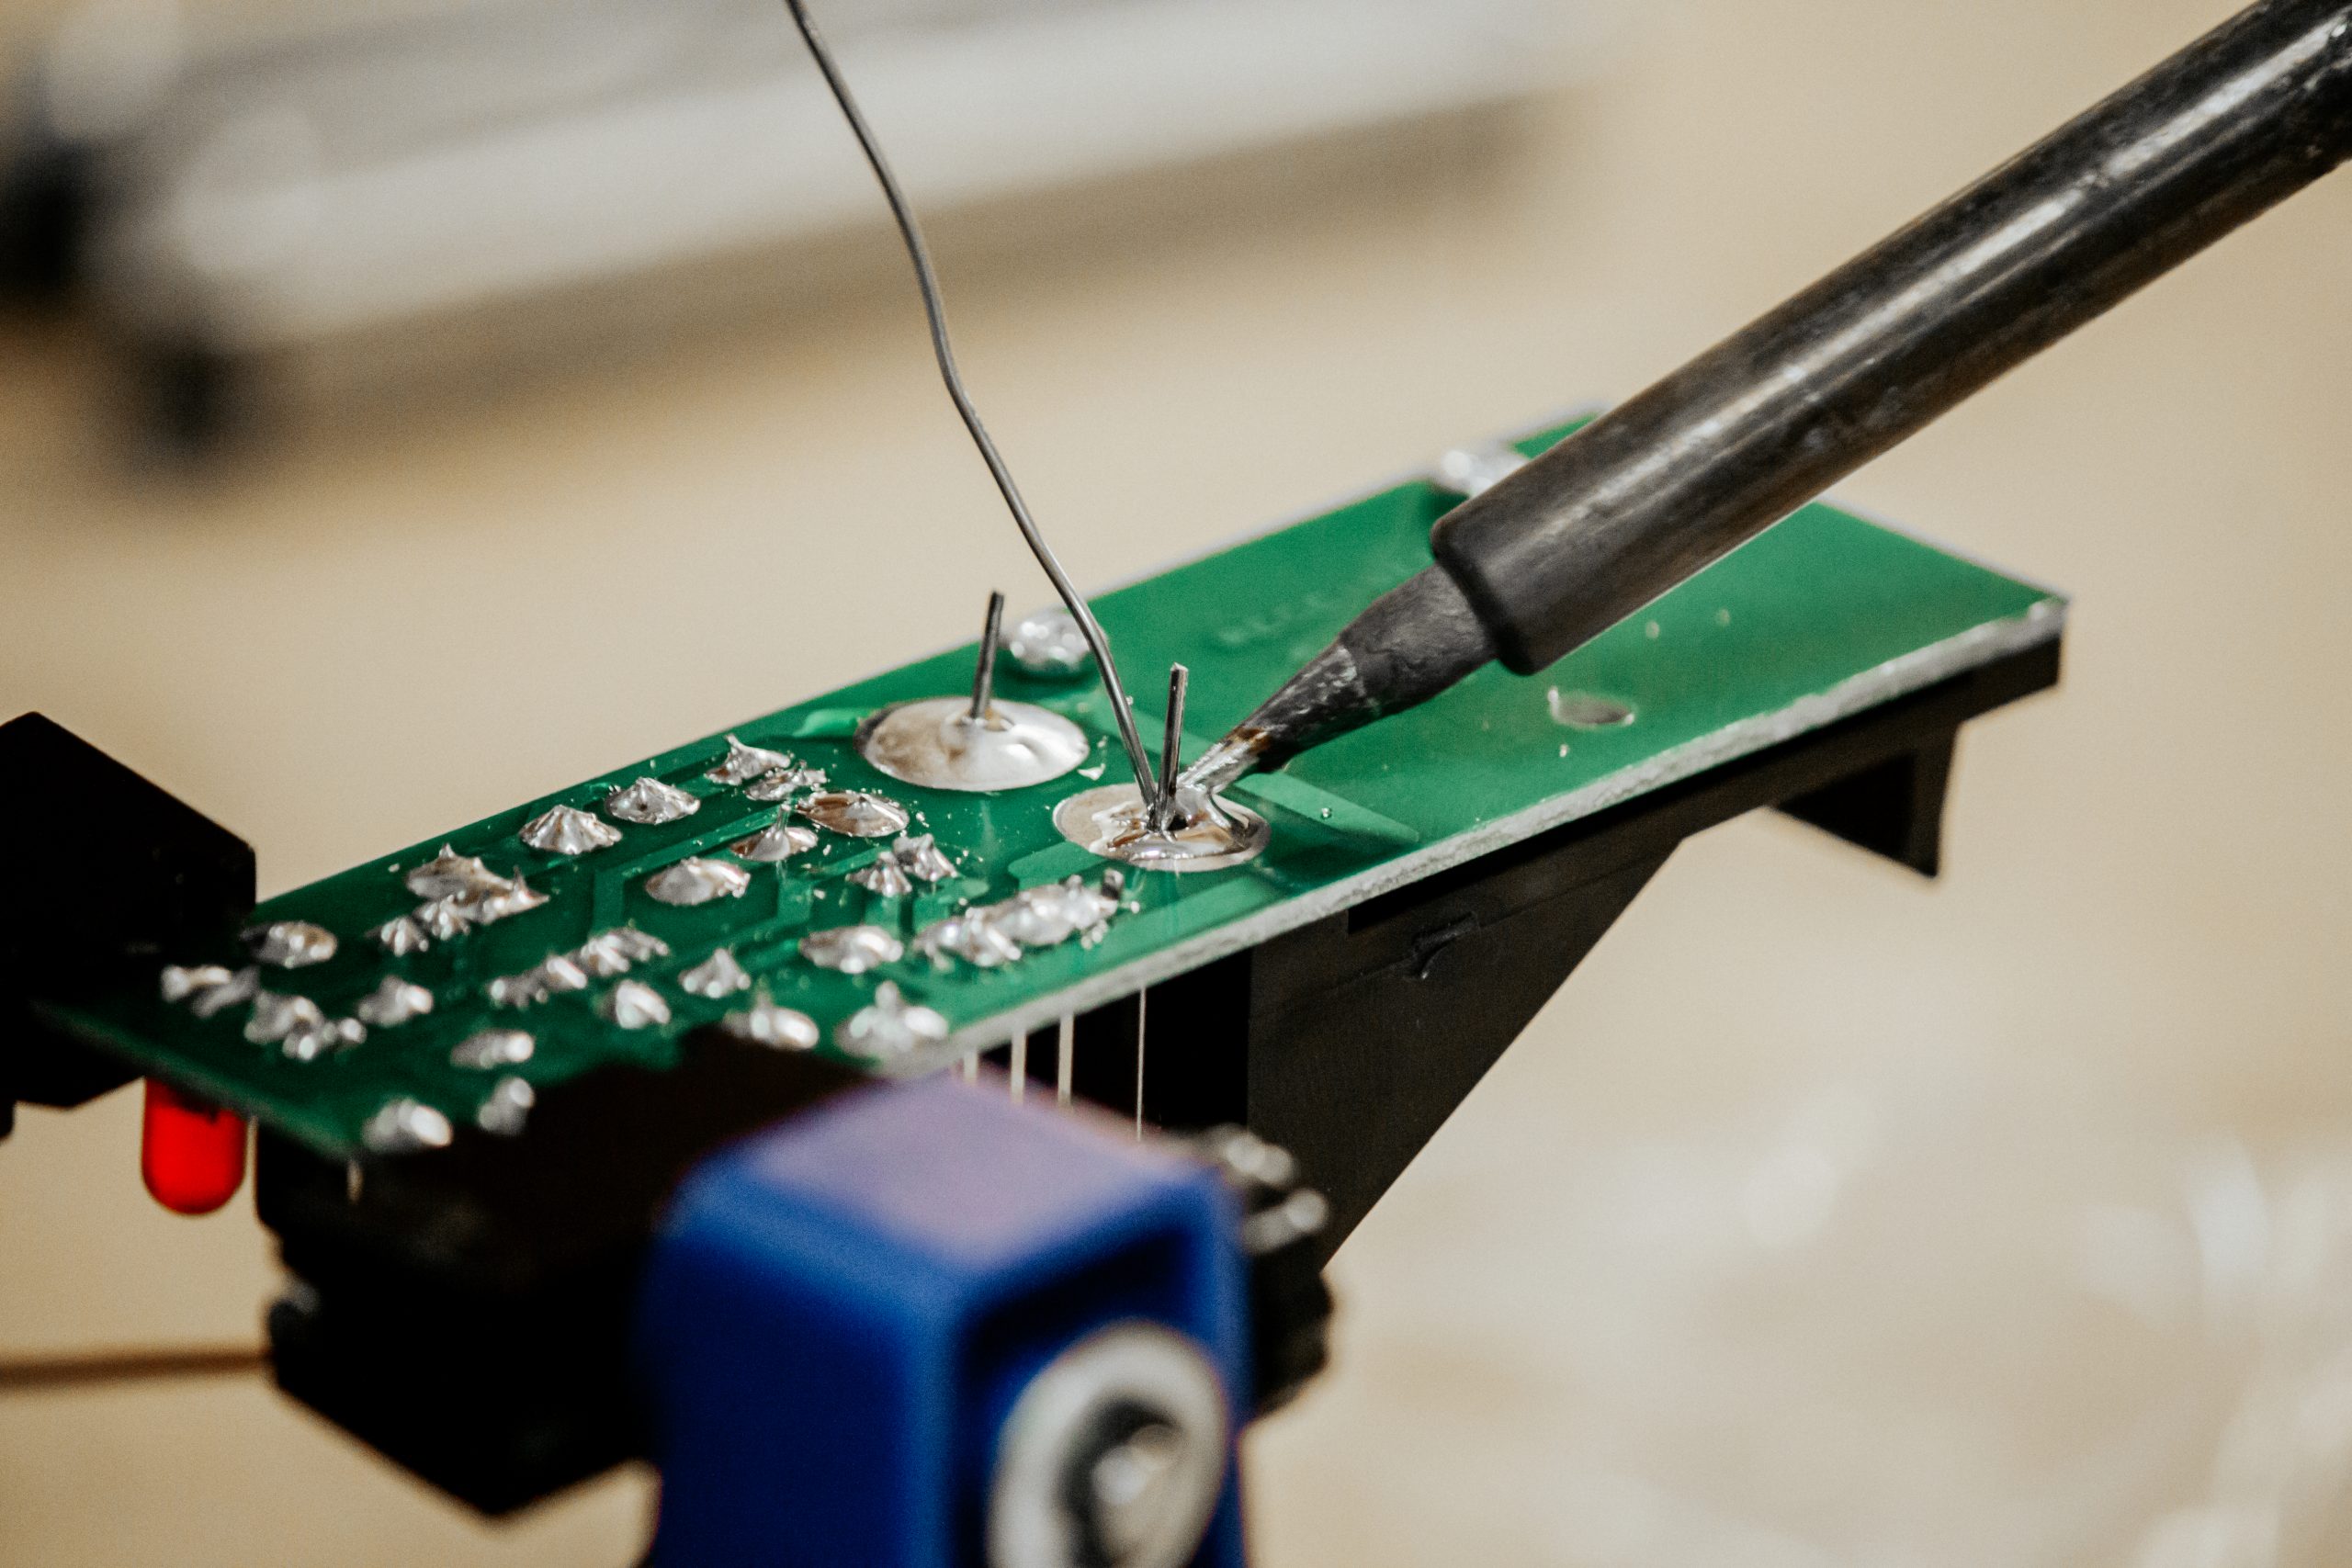 Soldering a lead on PCB